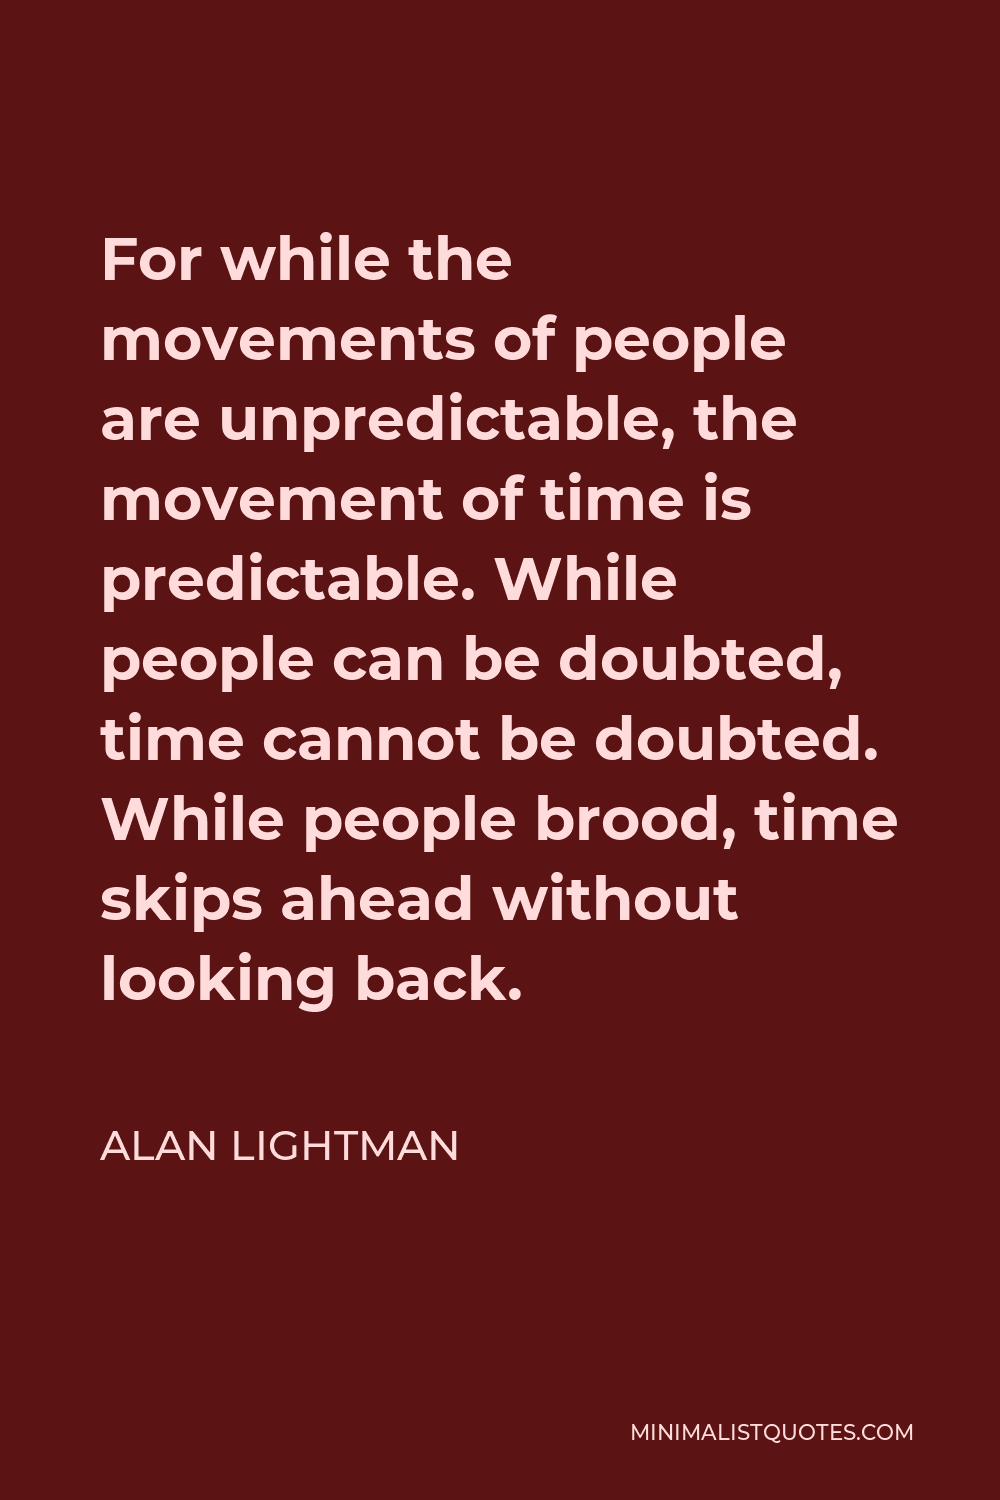 Alan Lightman Quote - For while the movements of people are unpredictable, the movement of time is predictable. While people can be doubted, time cannot be doubted. While people brood, time skips ahead without looking back.